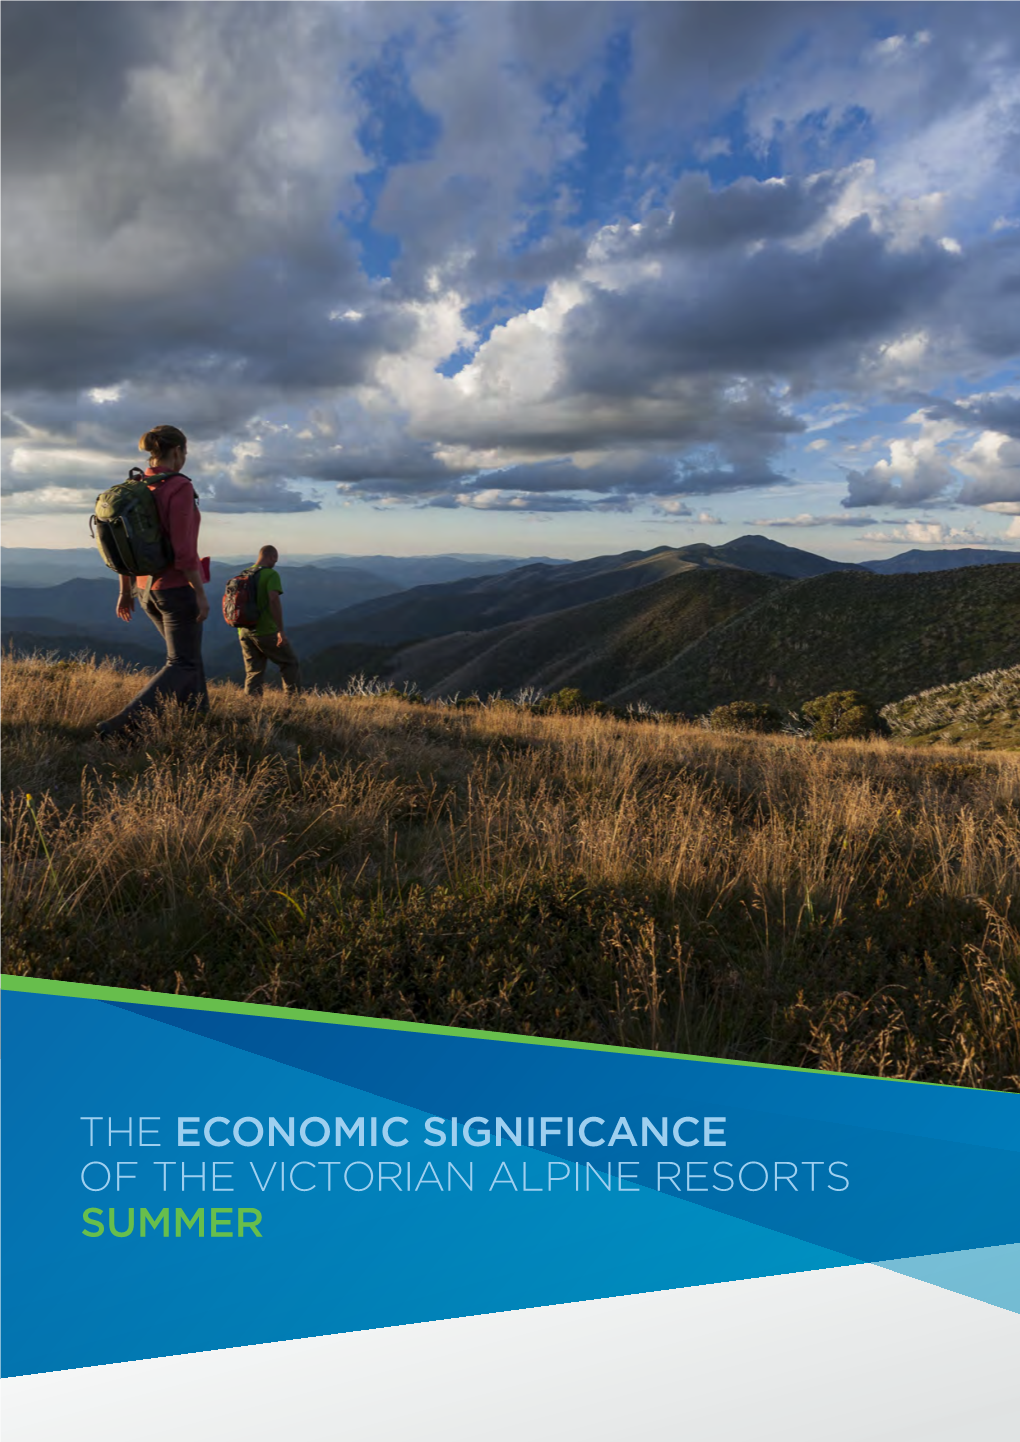 THE ECONOMIC SIGNIFICANCE of the VICTORIAN ALPINE RESORTS SUMMER Published by the Alpine Resorts Co-Ordinating Council, Acknowledgements: June 2013